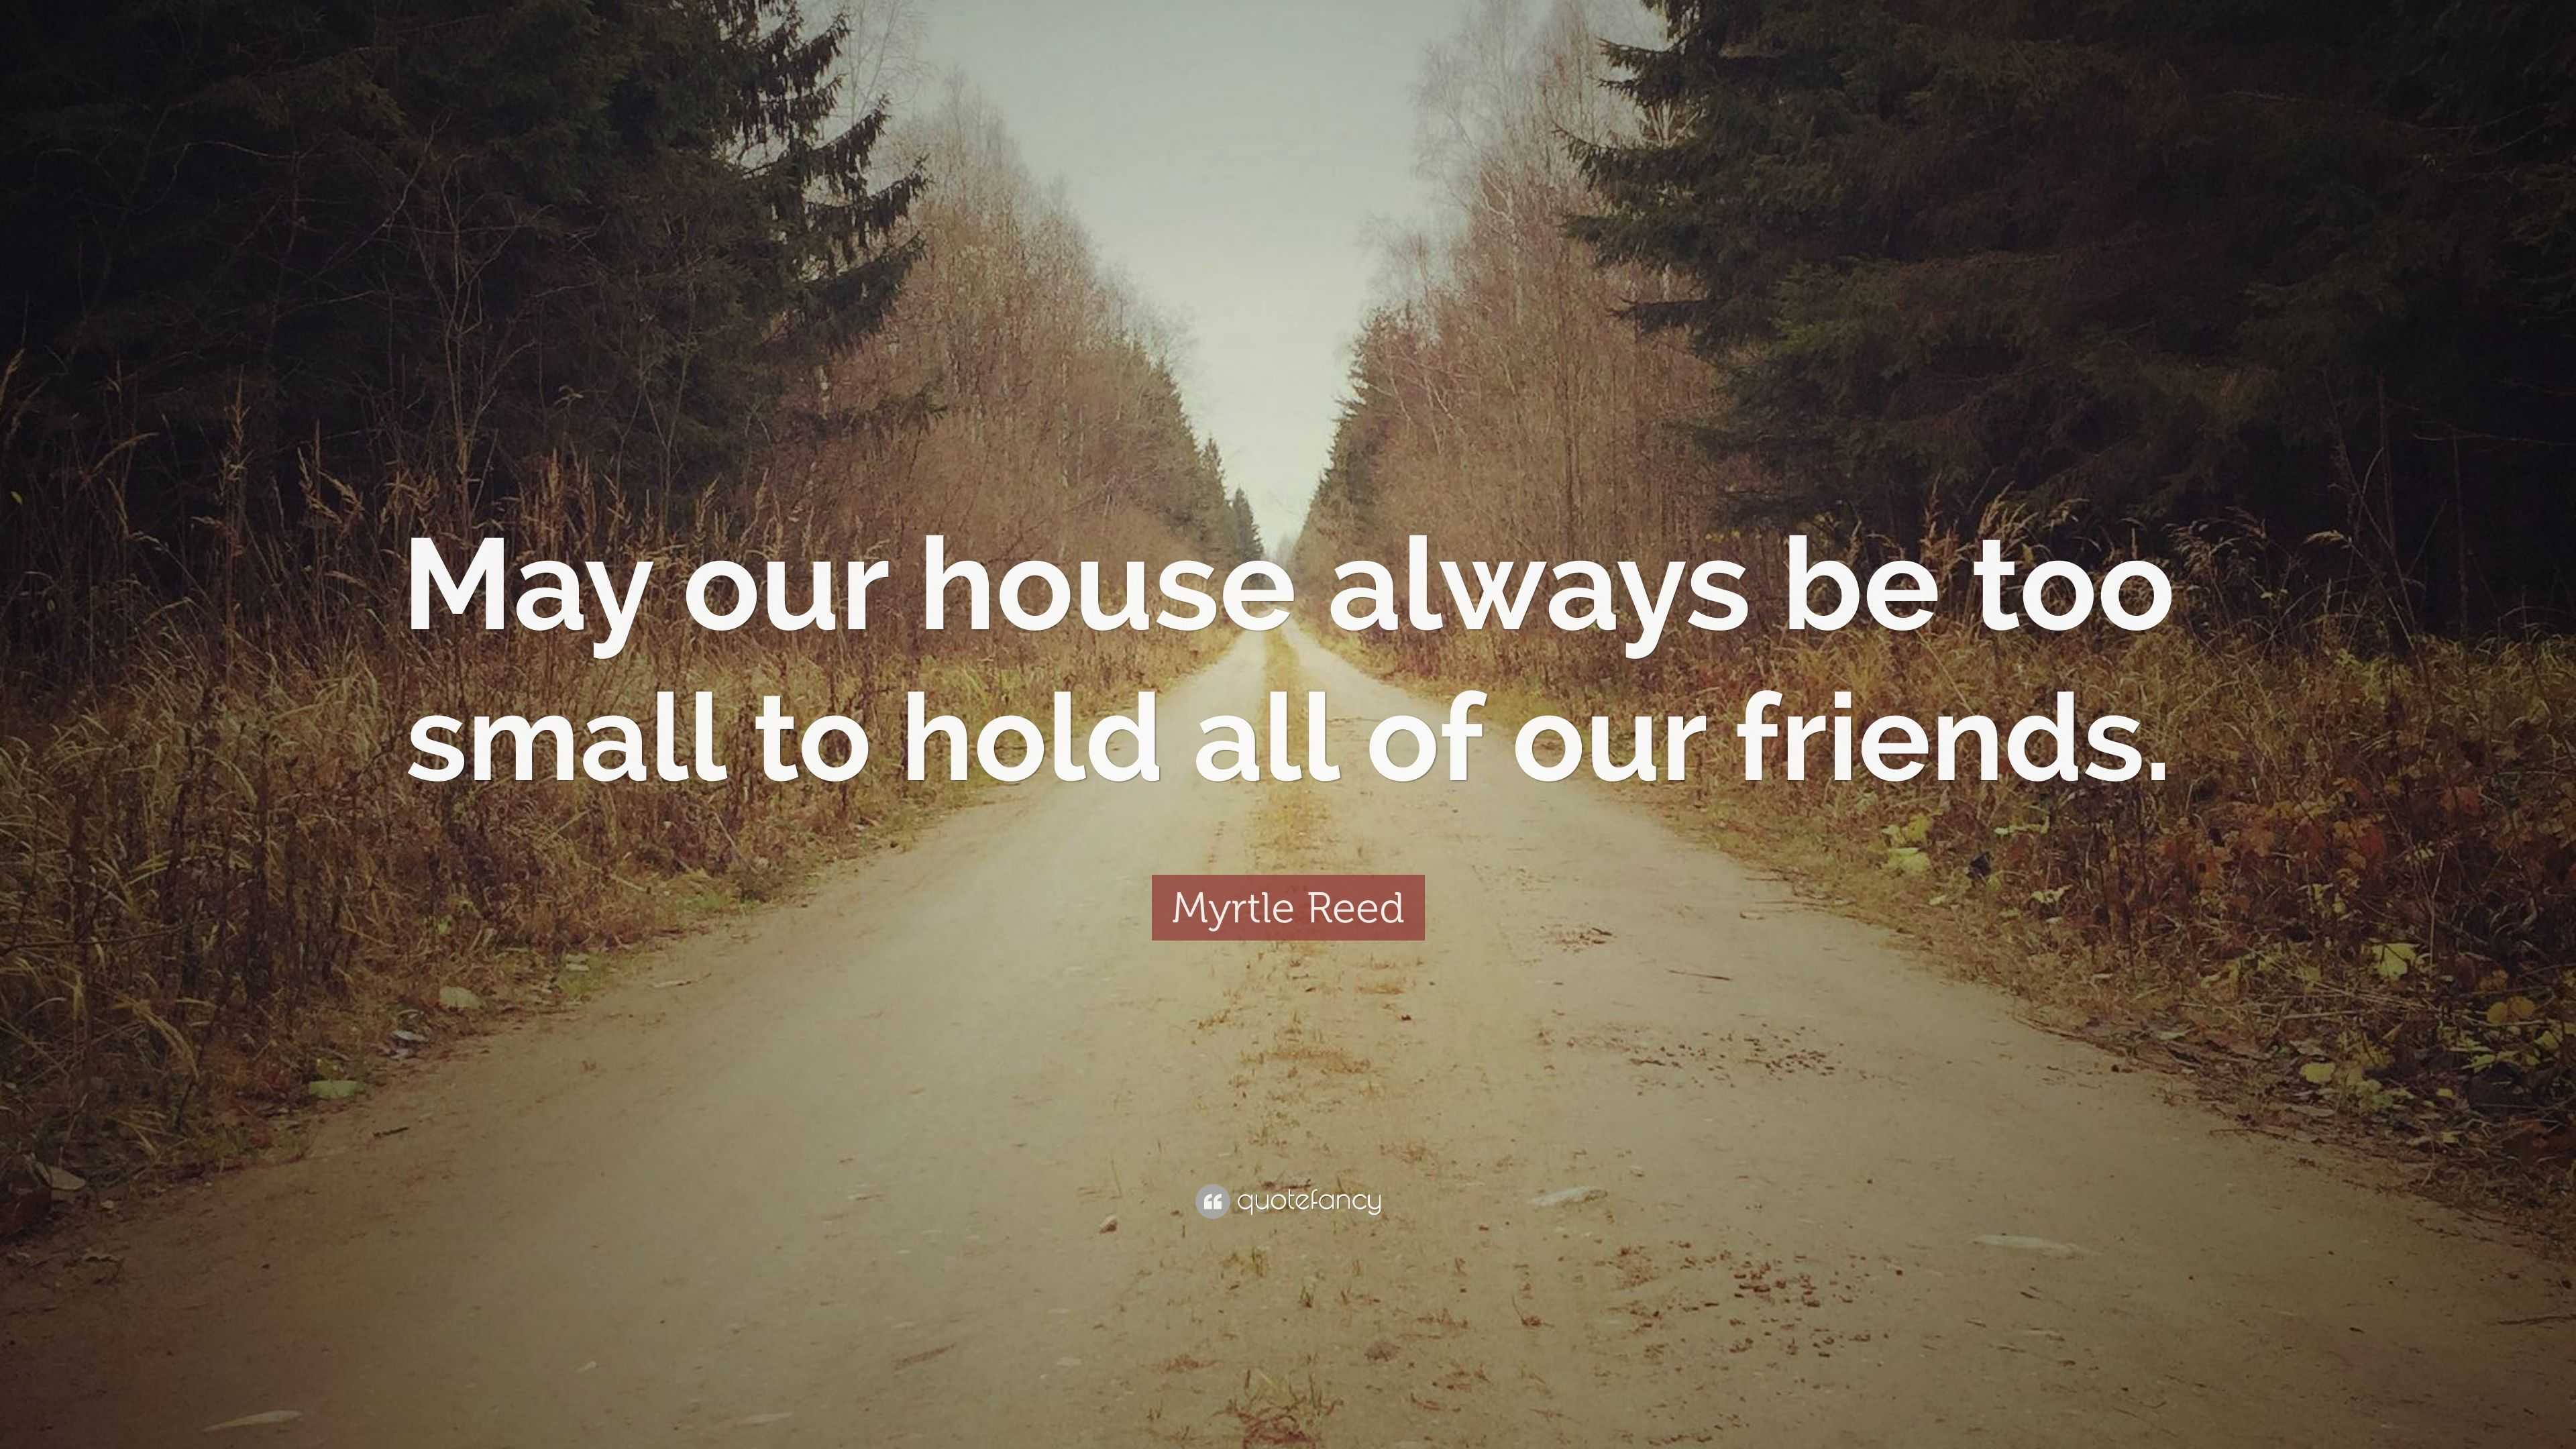 Myrtle Reed Quote: “May our house always be too small to hold all of ...